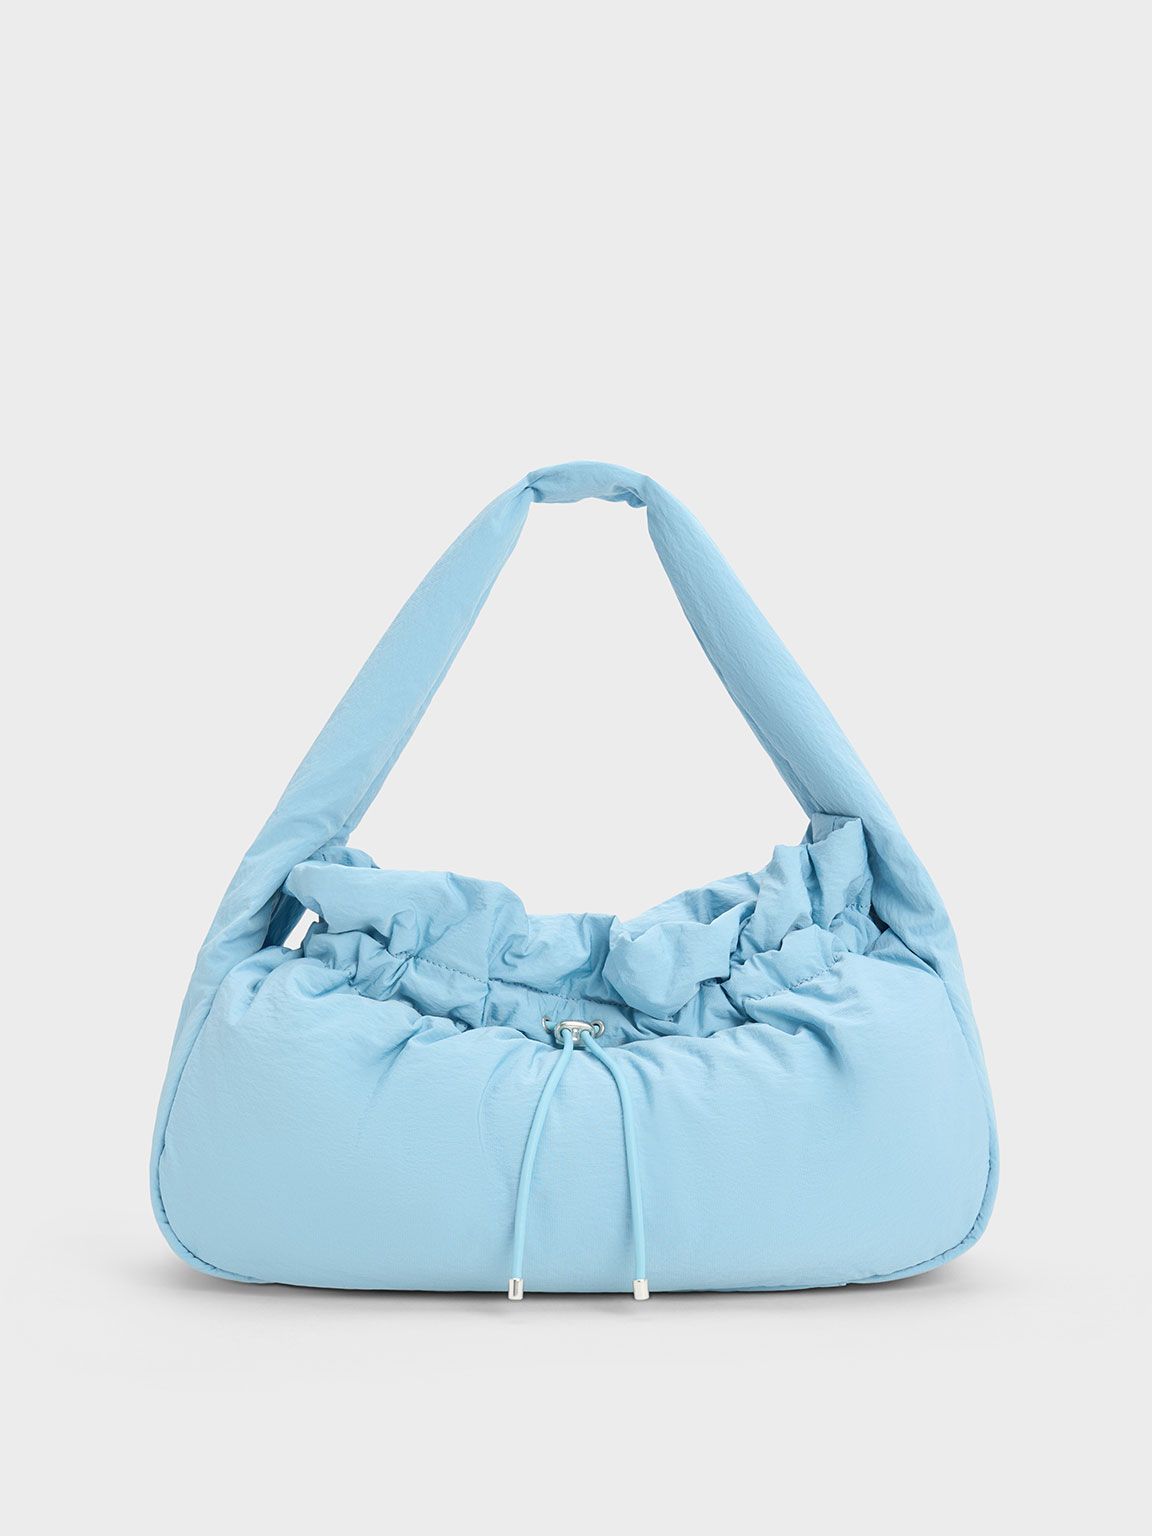 Hobo Bags Designs: Effortlessly Chic Carriers for Every Day